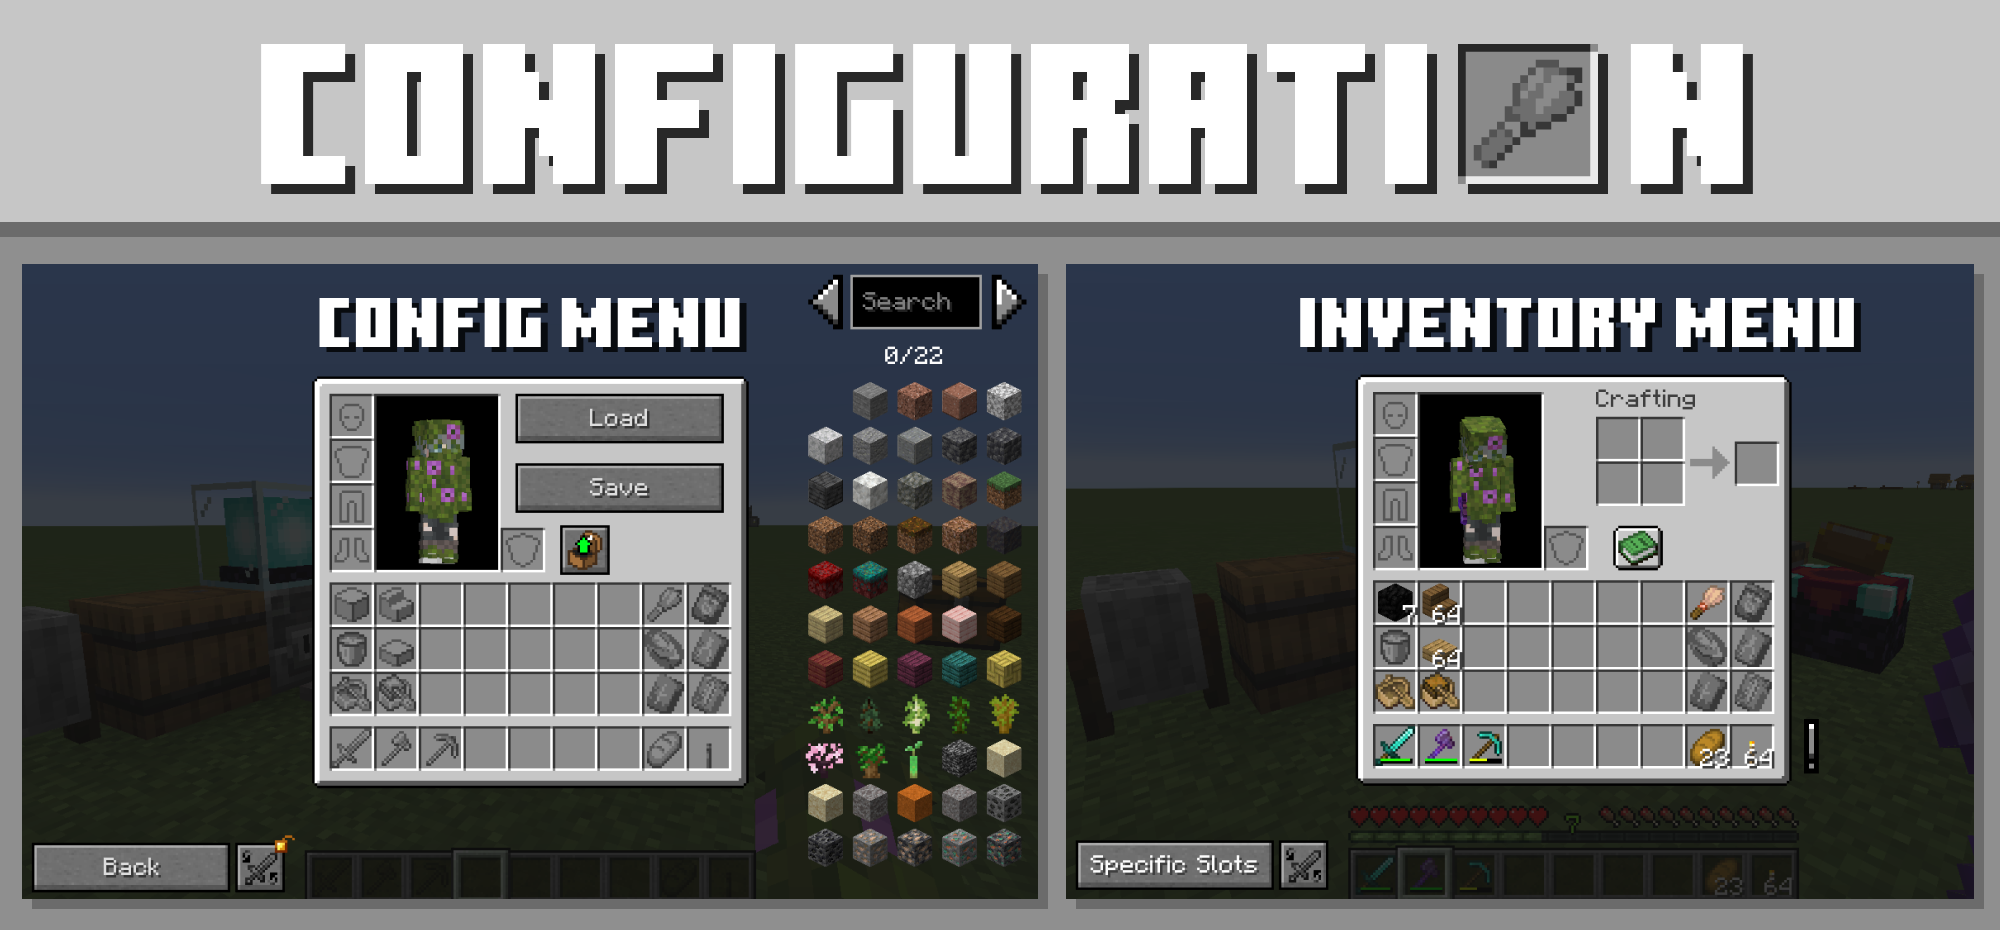 On the left you can see the Config Menu, and on the right is your inventory